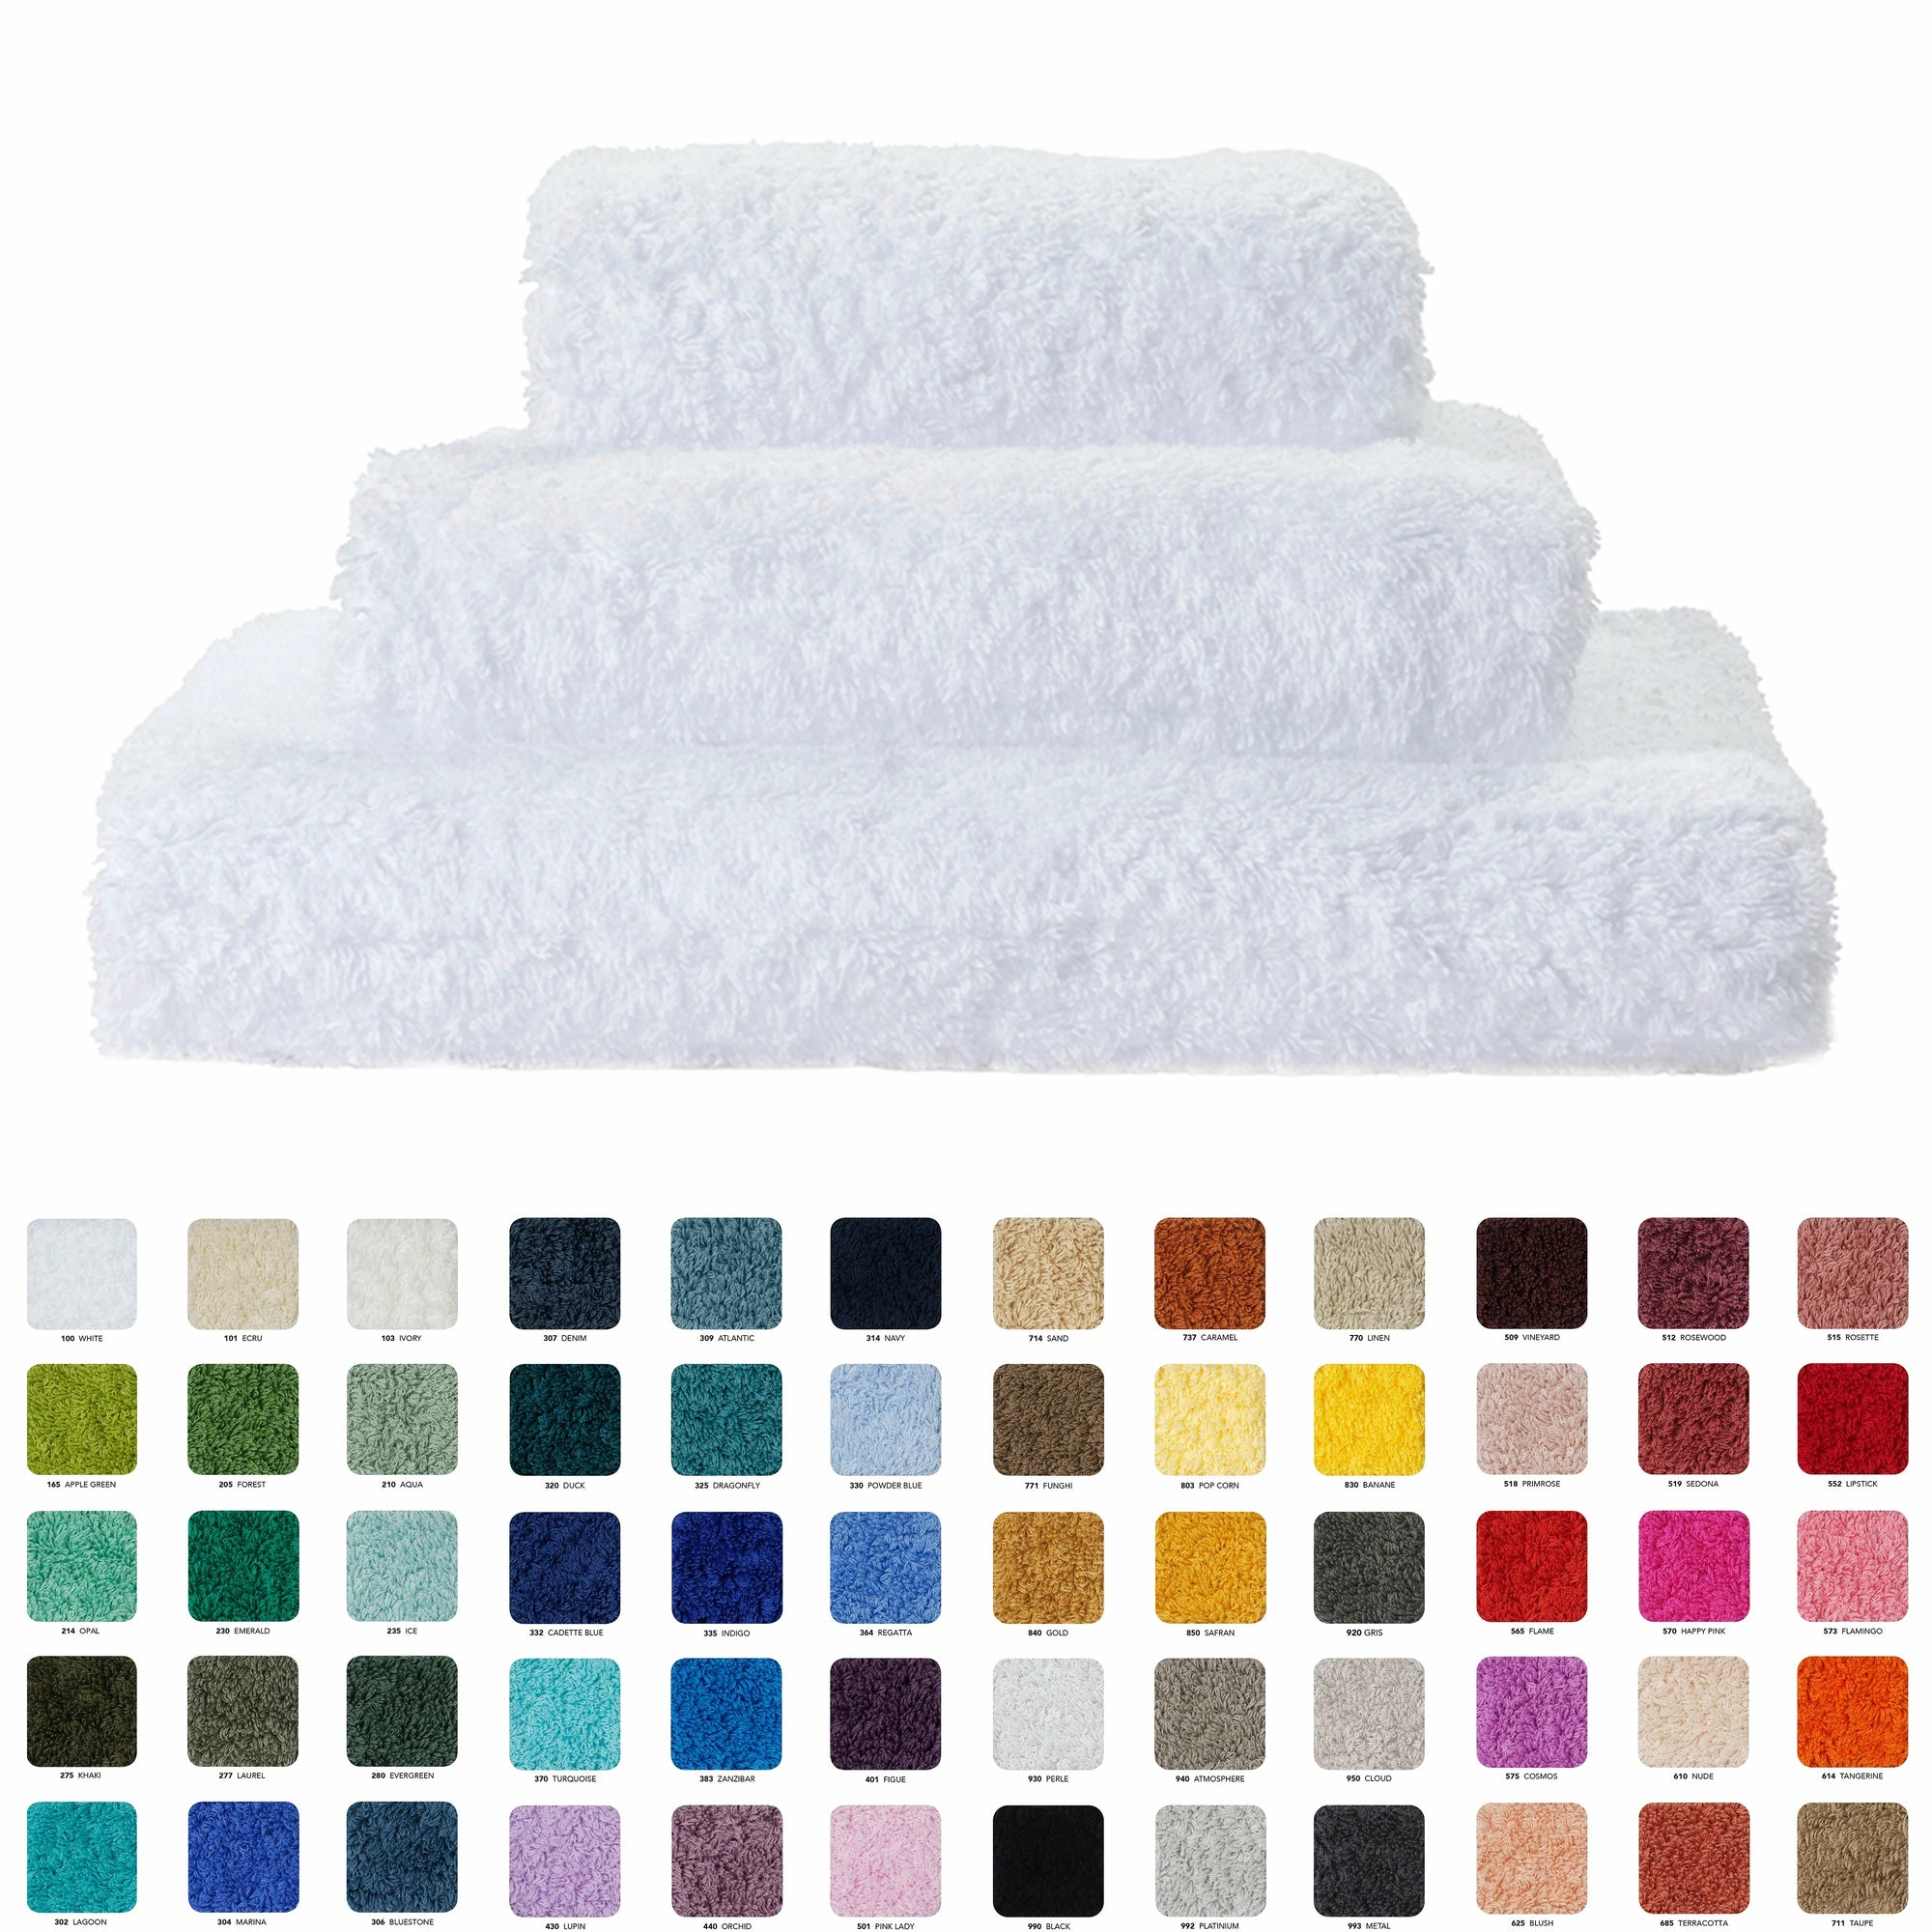 Abyss Super Pile Bath Towels from Portugal Available in 60 Color Options